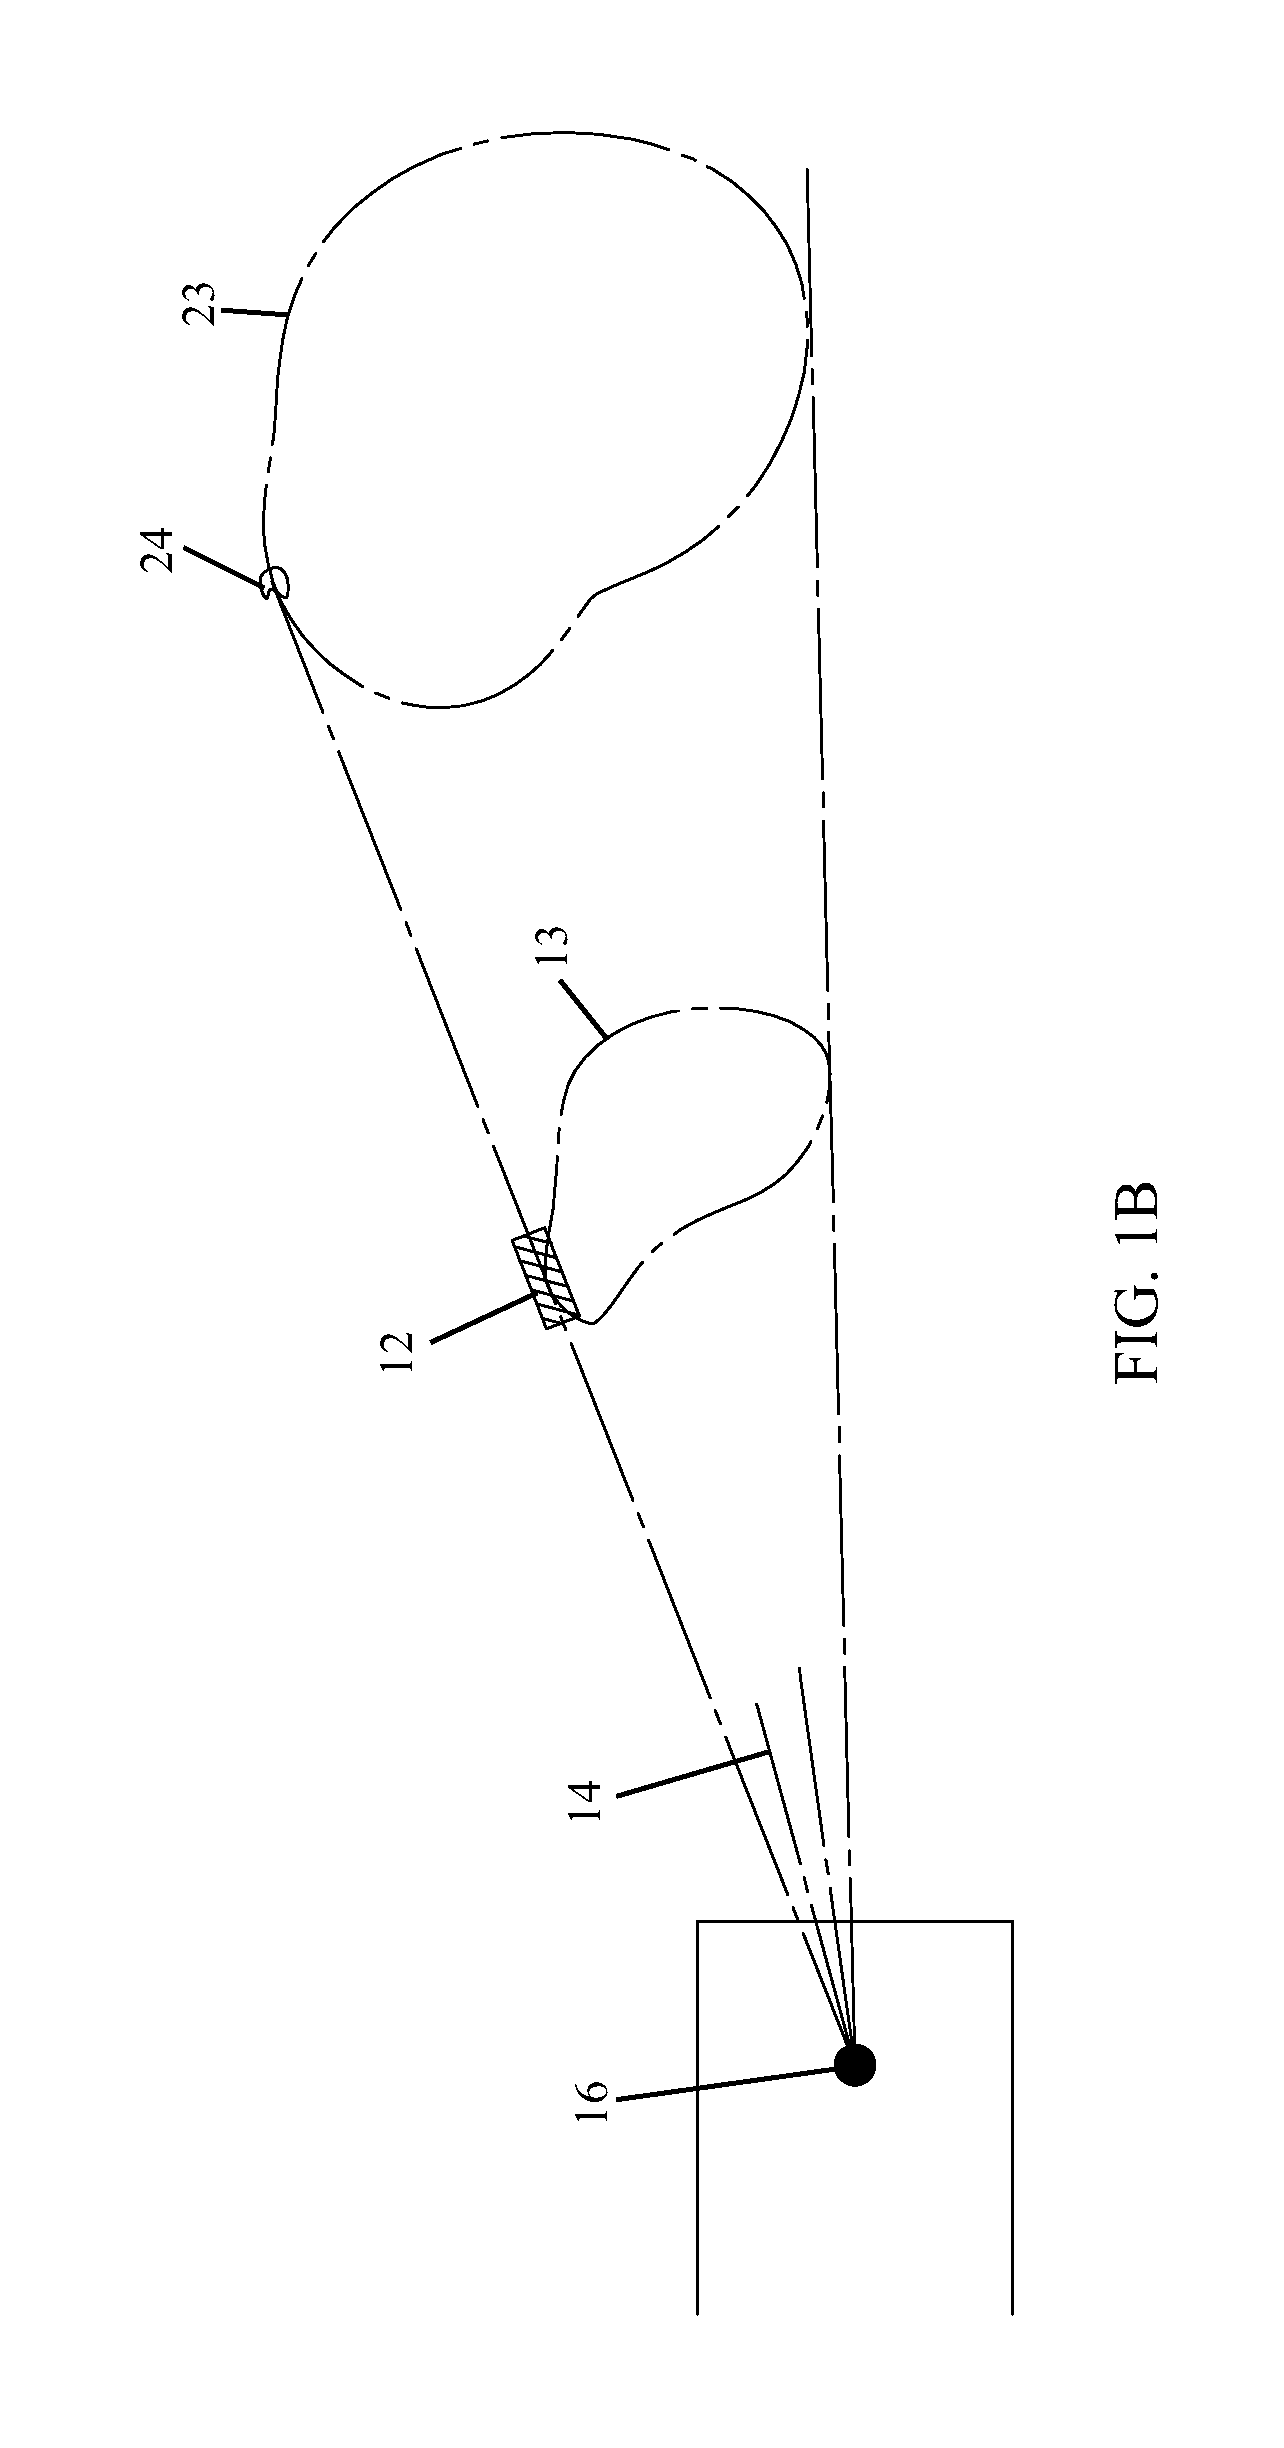 Stereotactic radiotherapy with rotating attenuator